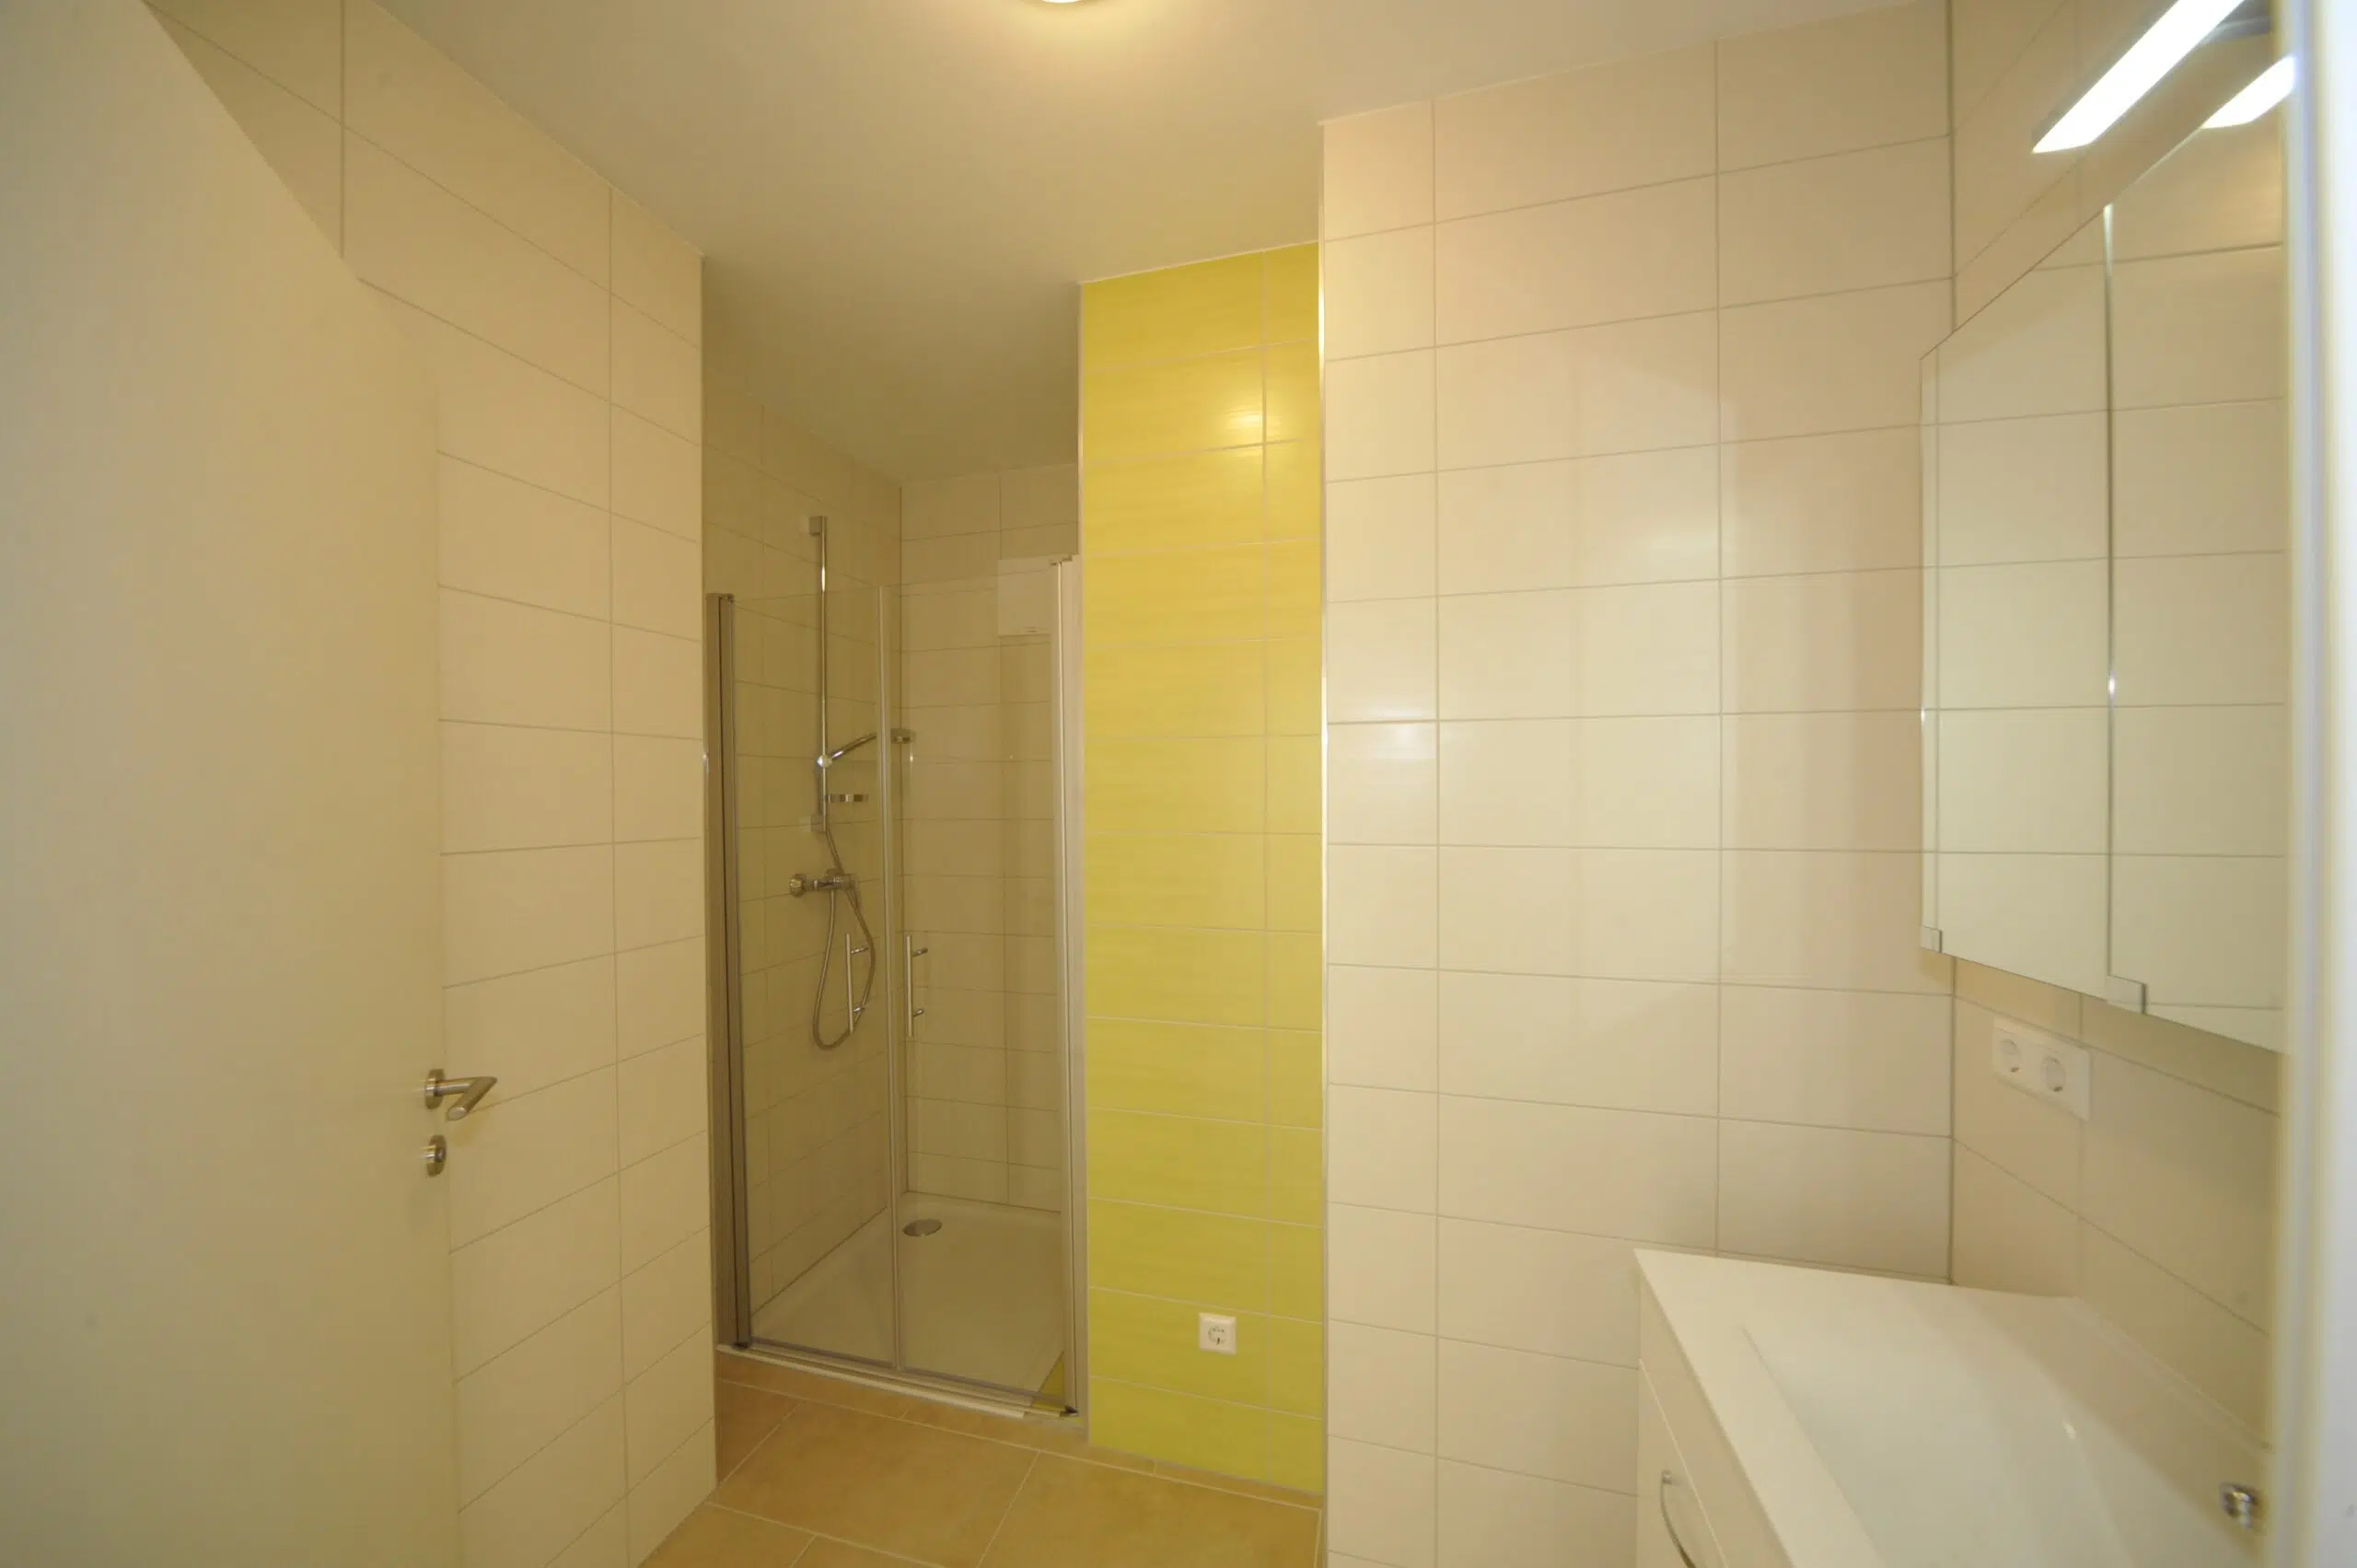 Bathroom in shared apartment for assembly workers in graz